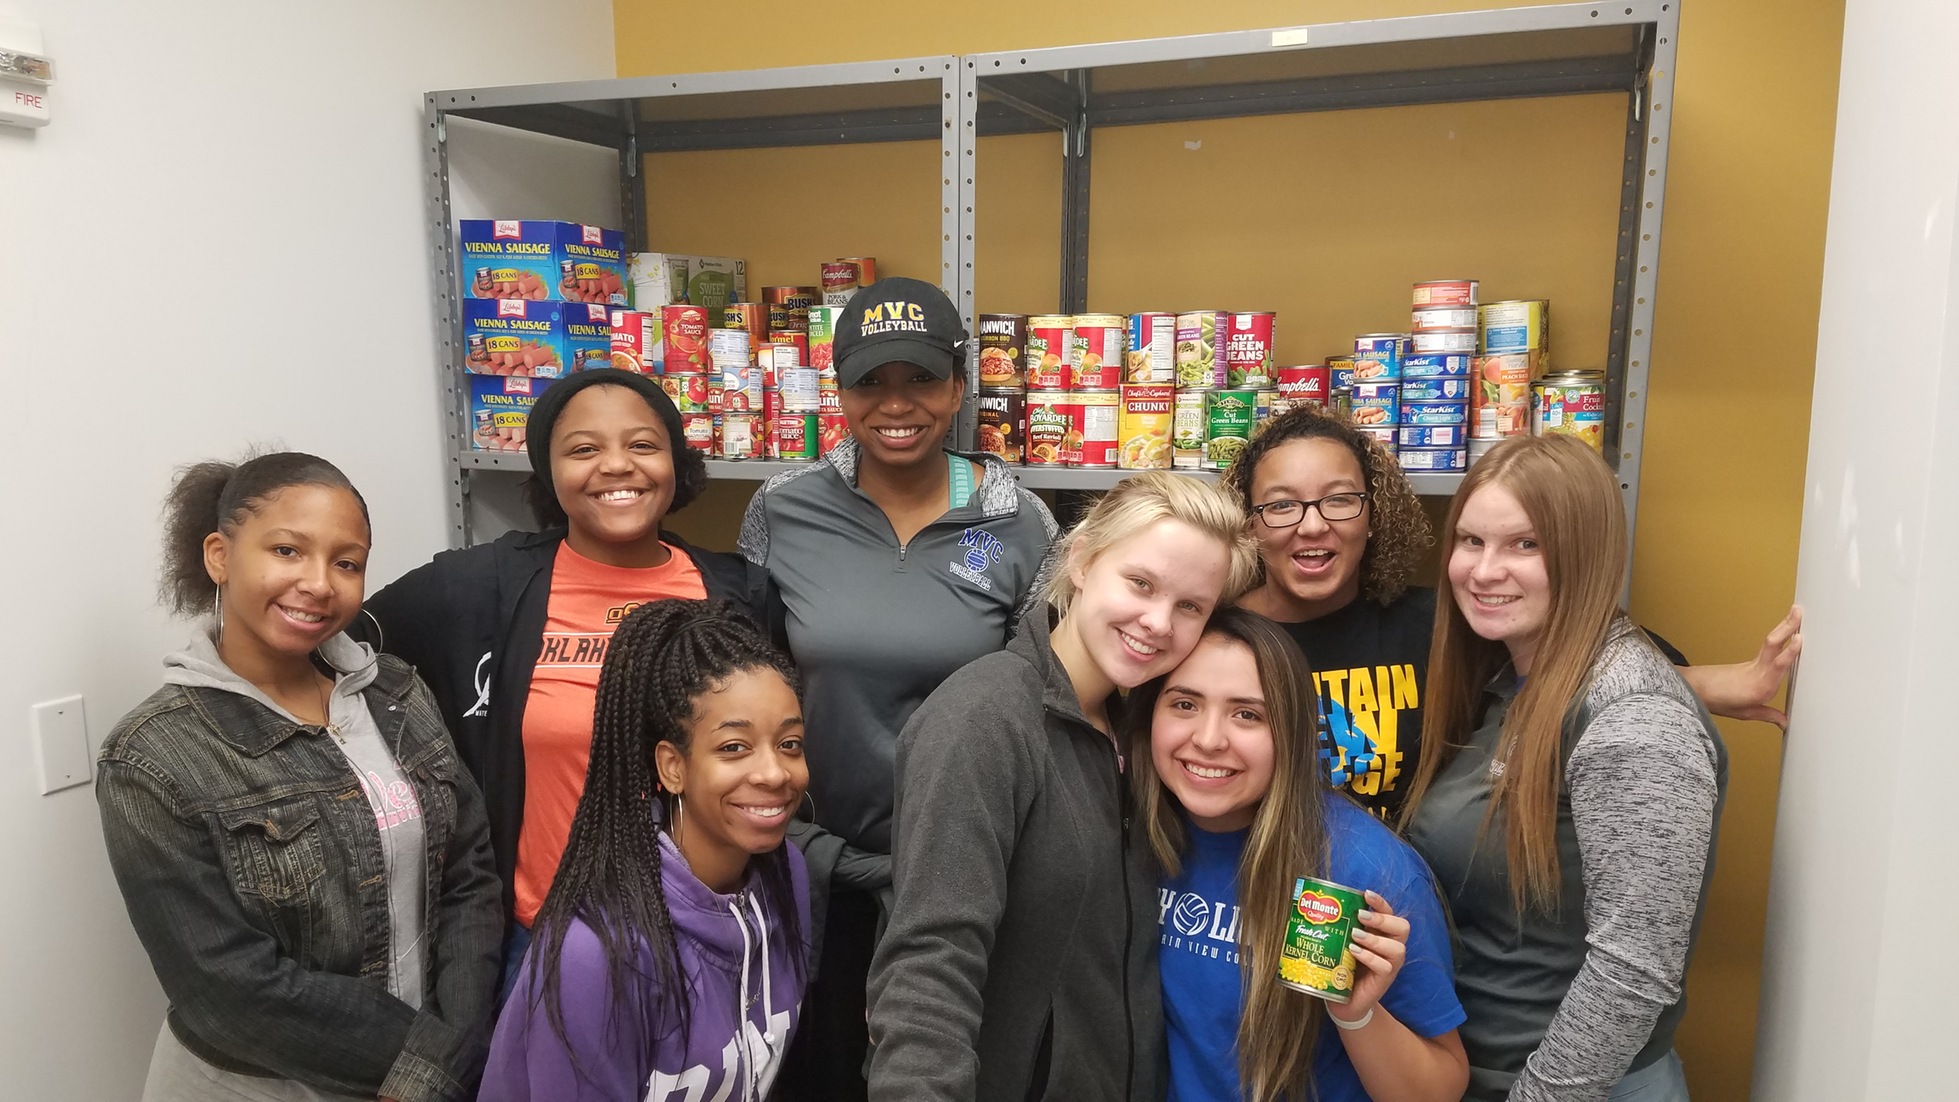 Volleyball team poses in front of canned goods.